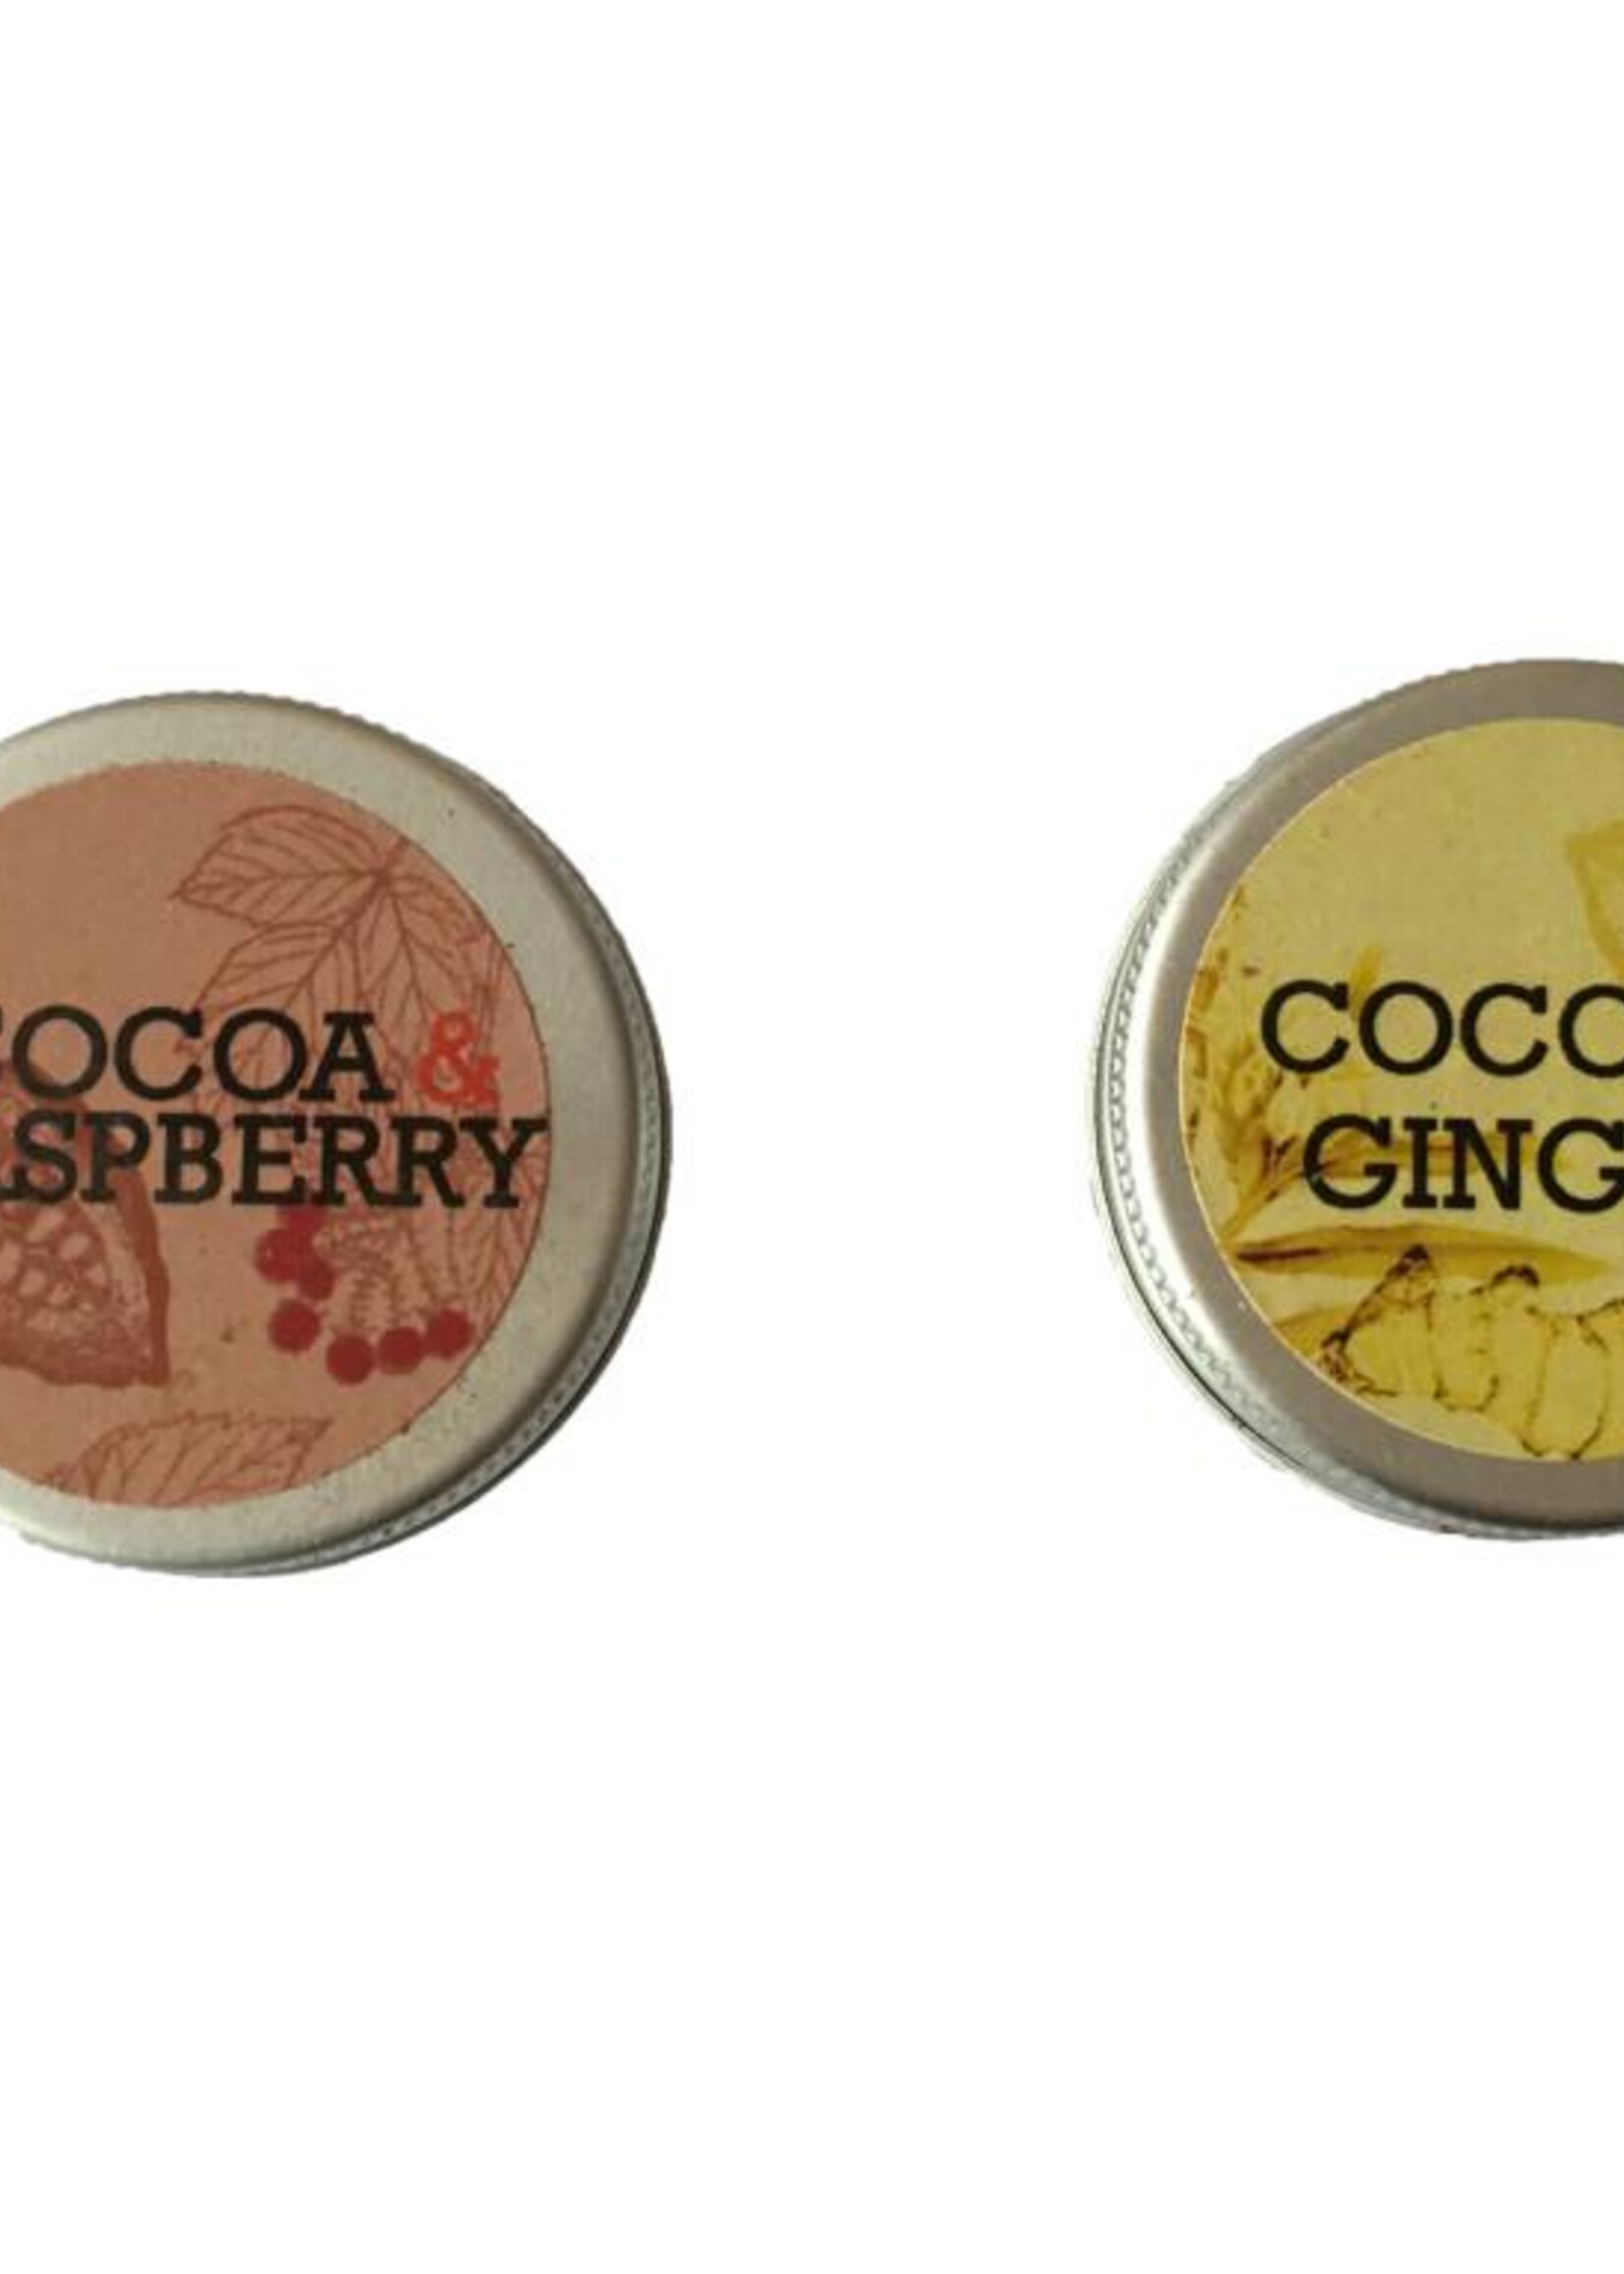 Refill for the Chocolate shooter: Cocoa snuff